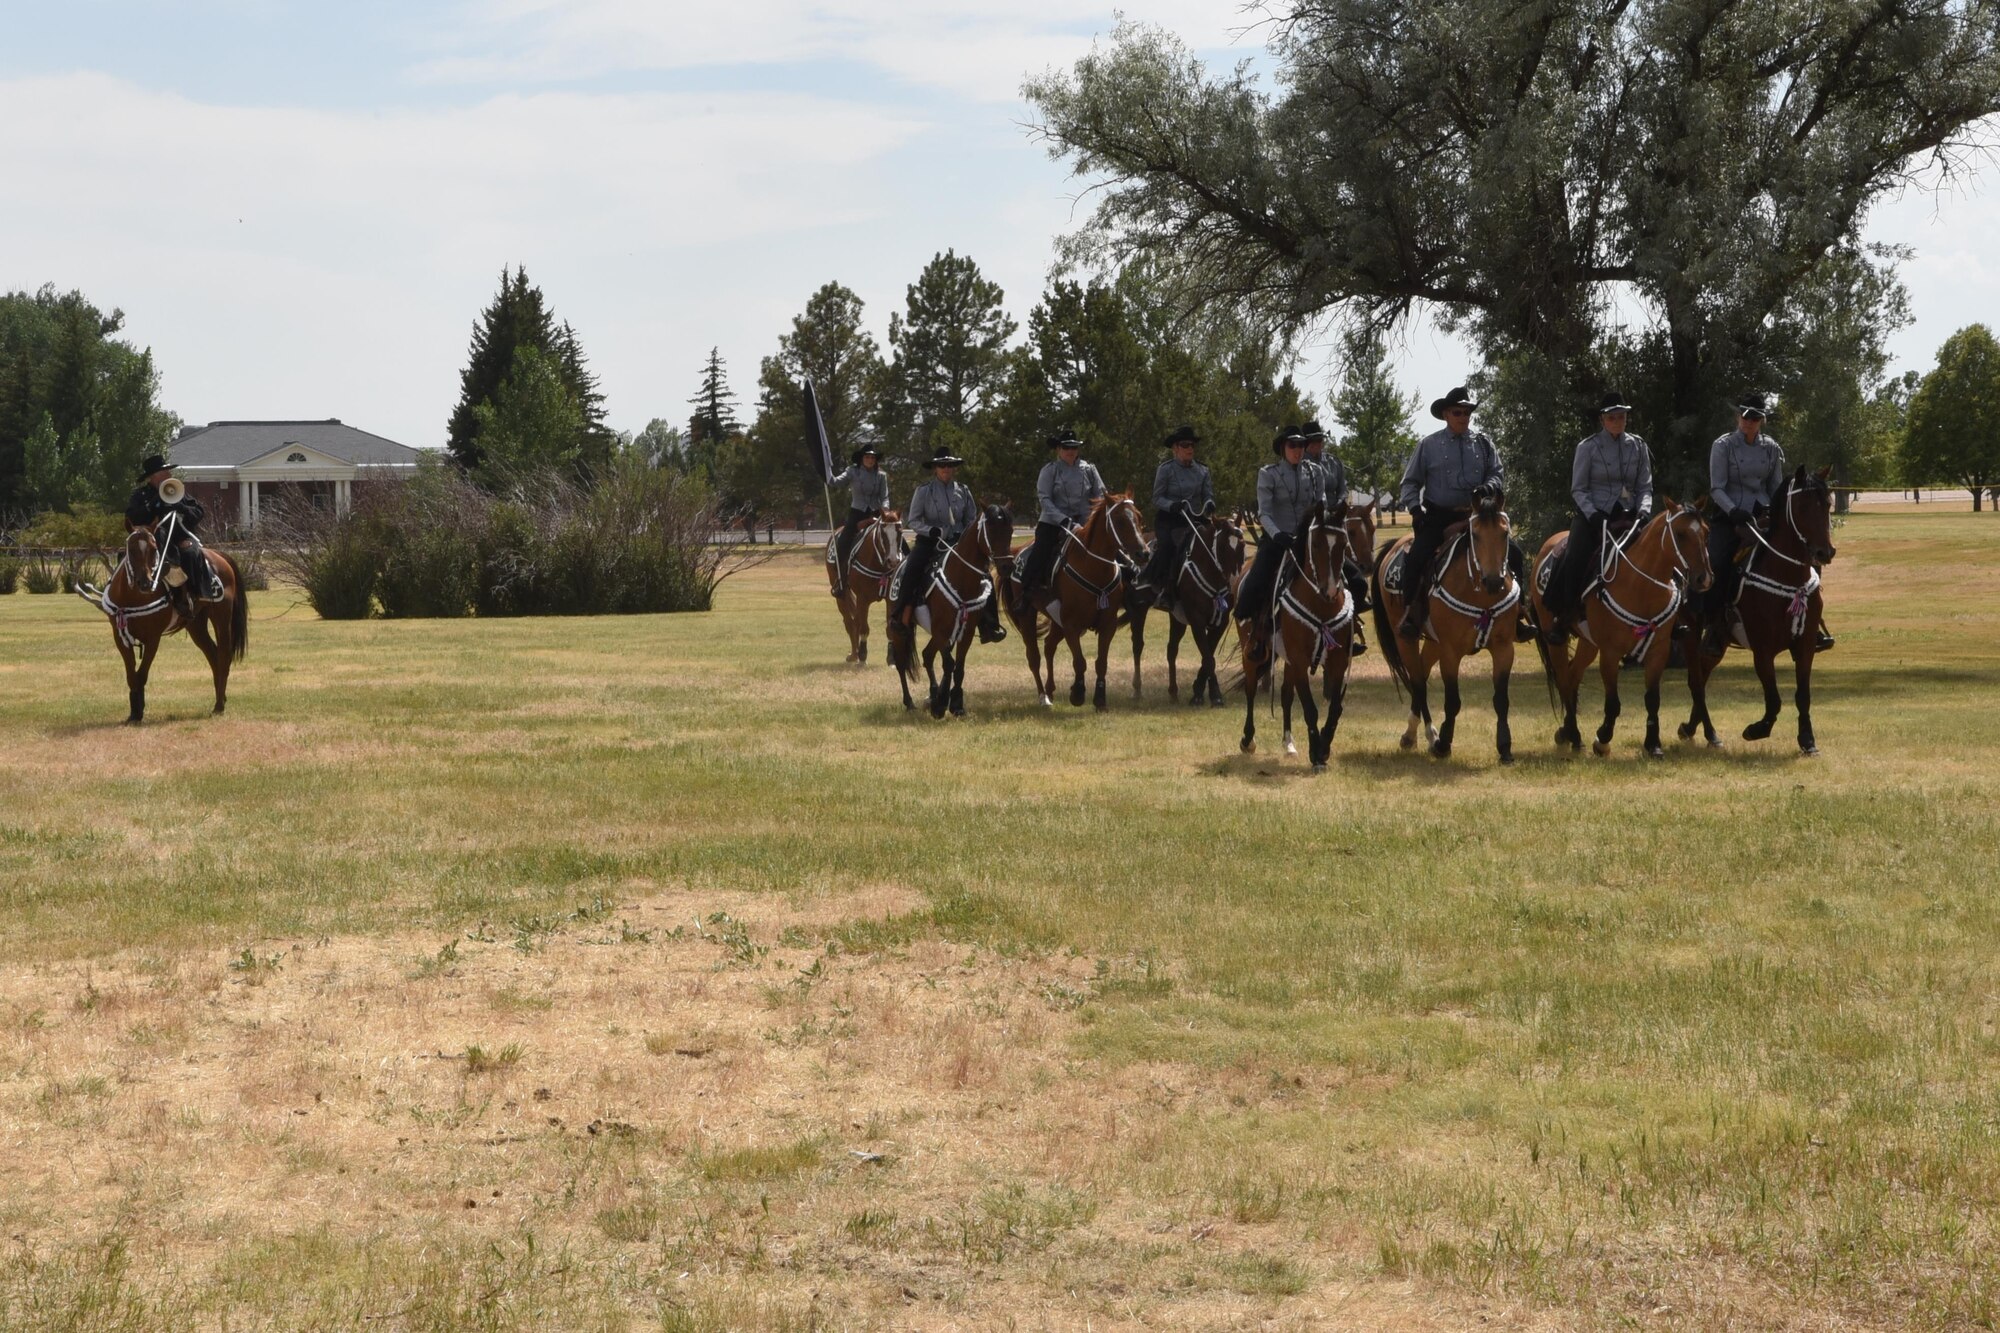 Members of the Trotters Equestrian team perform during Fort D.A. Russell Days, at F.E. Warren Air Force Base, Wyo., July 22, 2017.  The performance is a demonstration of historical cavalry precision riding drills. (U.S. Air Force photo by Terry Higgins)


